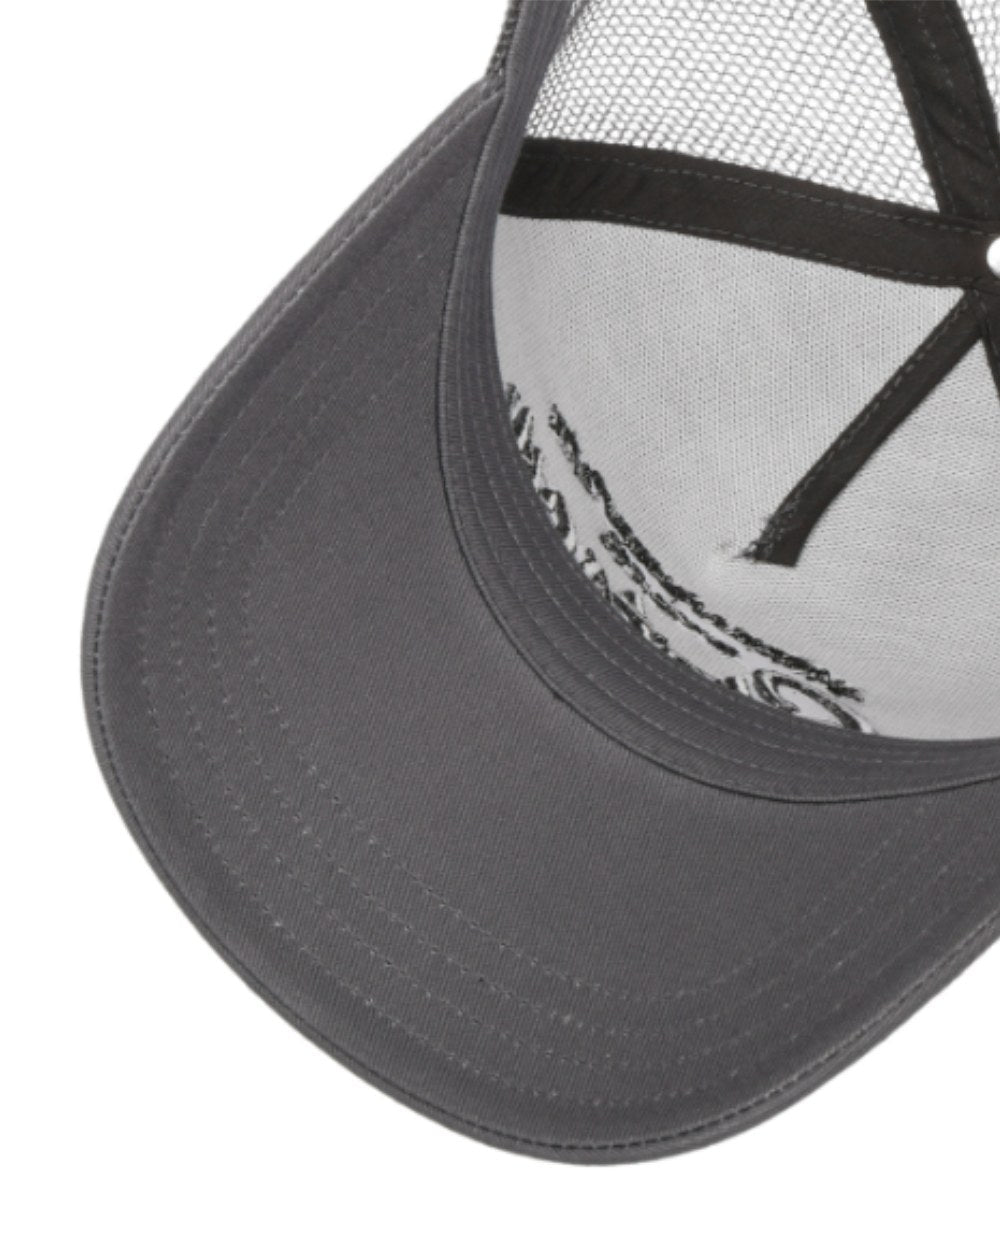 Grey coloured Stetson American Heritage Classic Trucker Cap on White background 